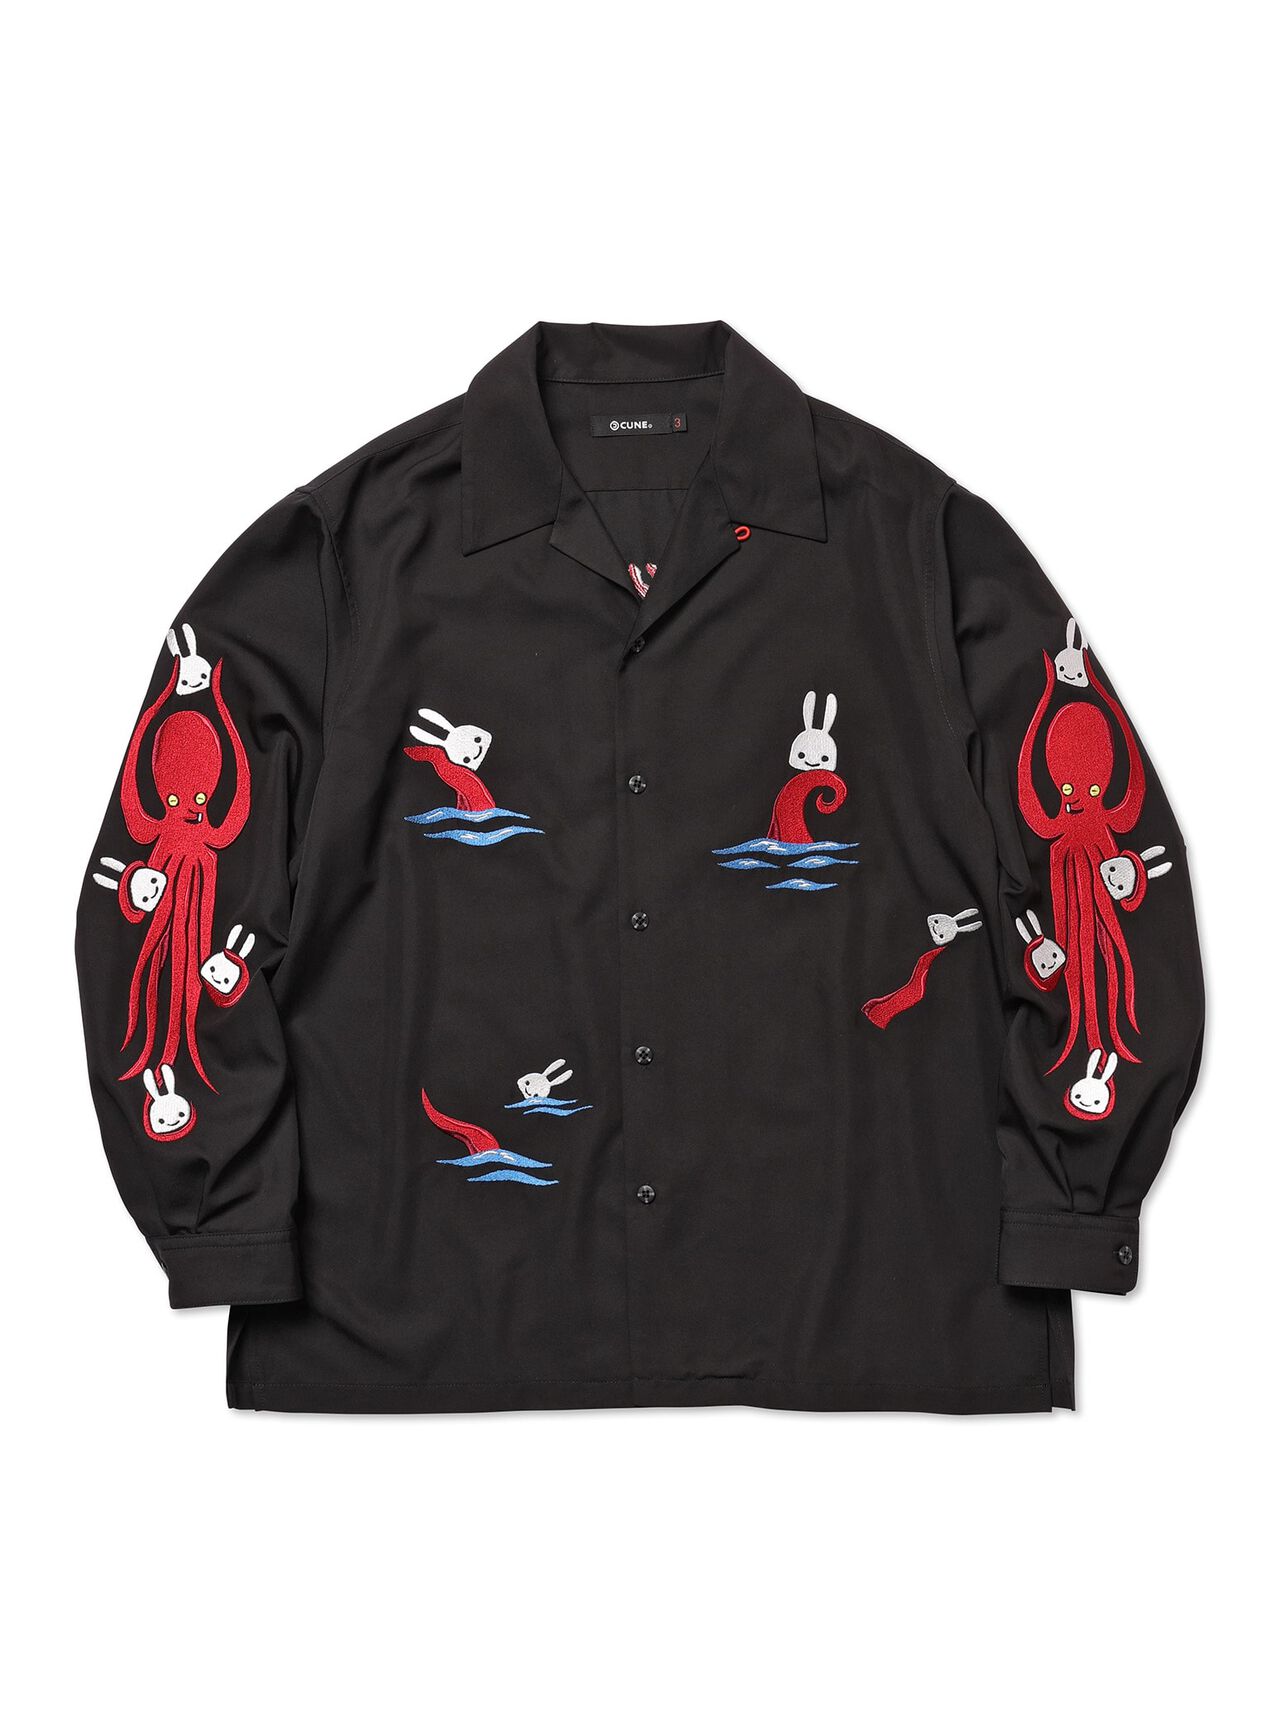 Long-sleeved open-collared shirt with embroidery of sea cucumber,, large image number 1